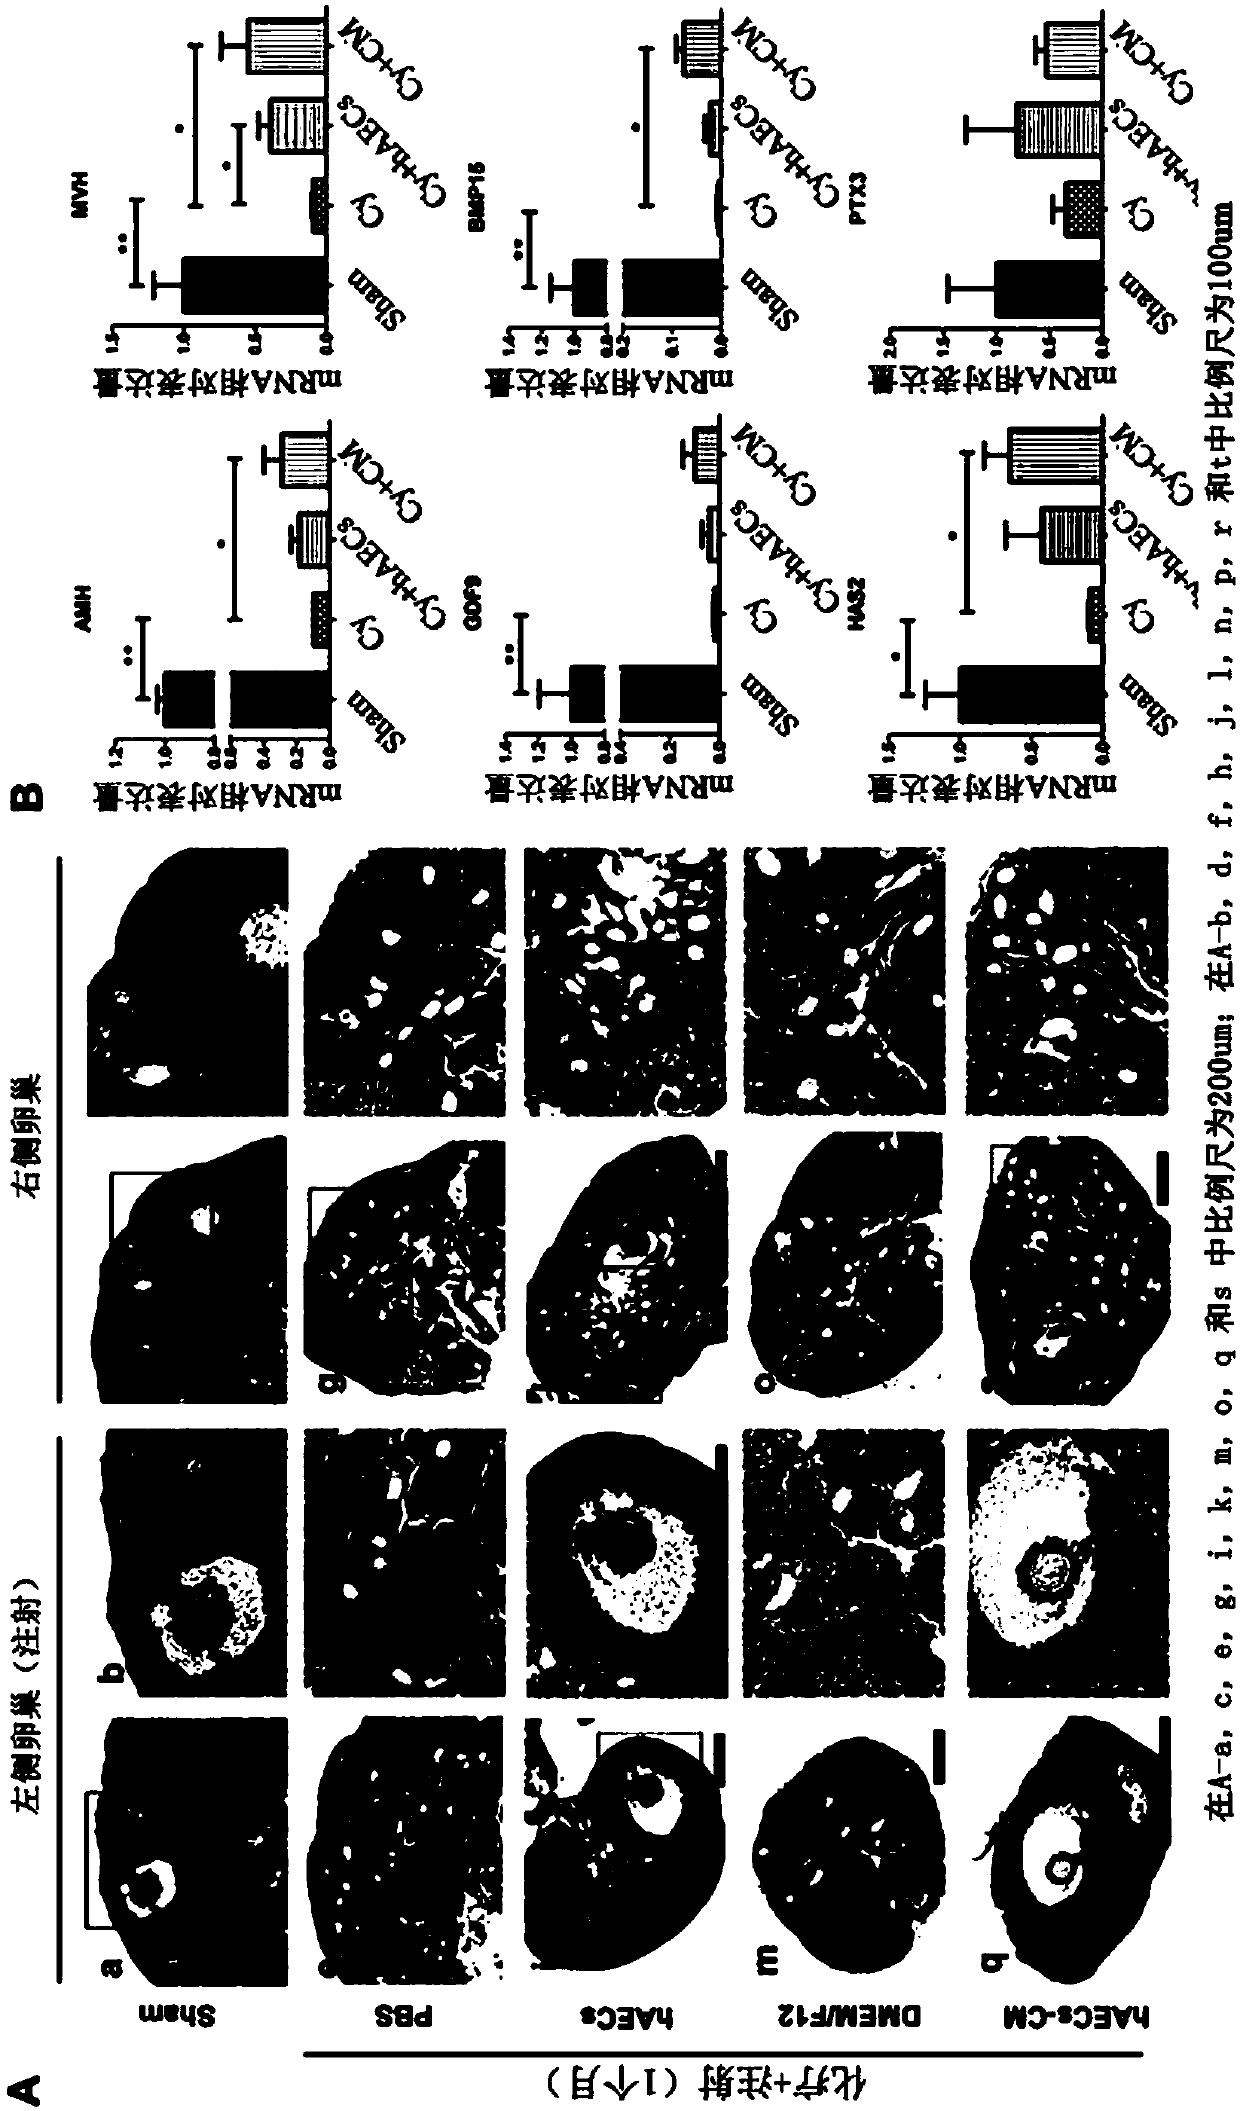 Application of human amniotic epithelial cell secretory factor in preparation of medicine for ovarian function restoration